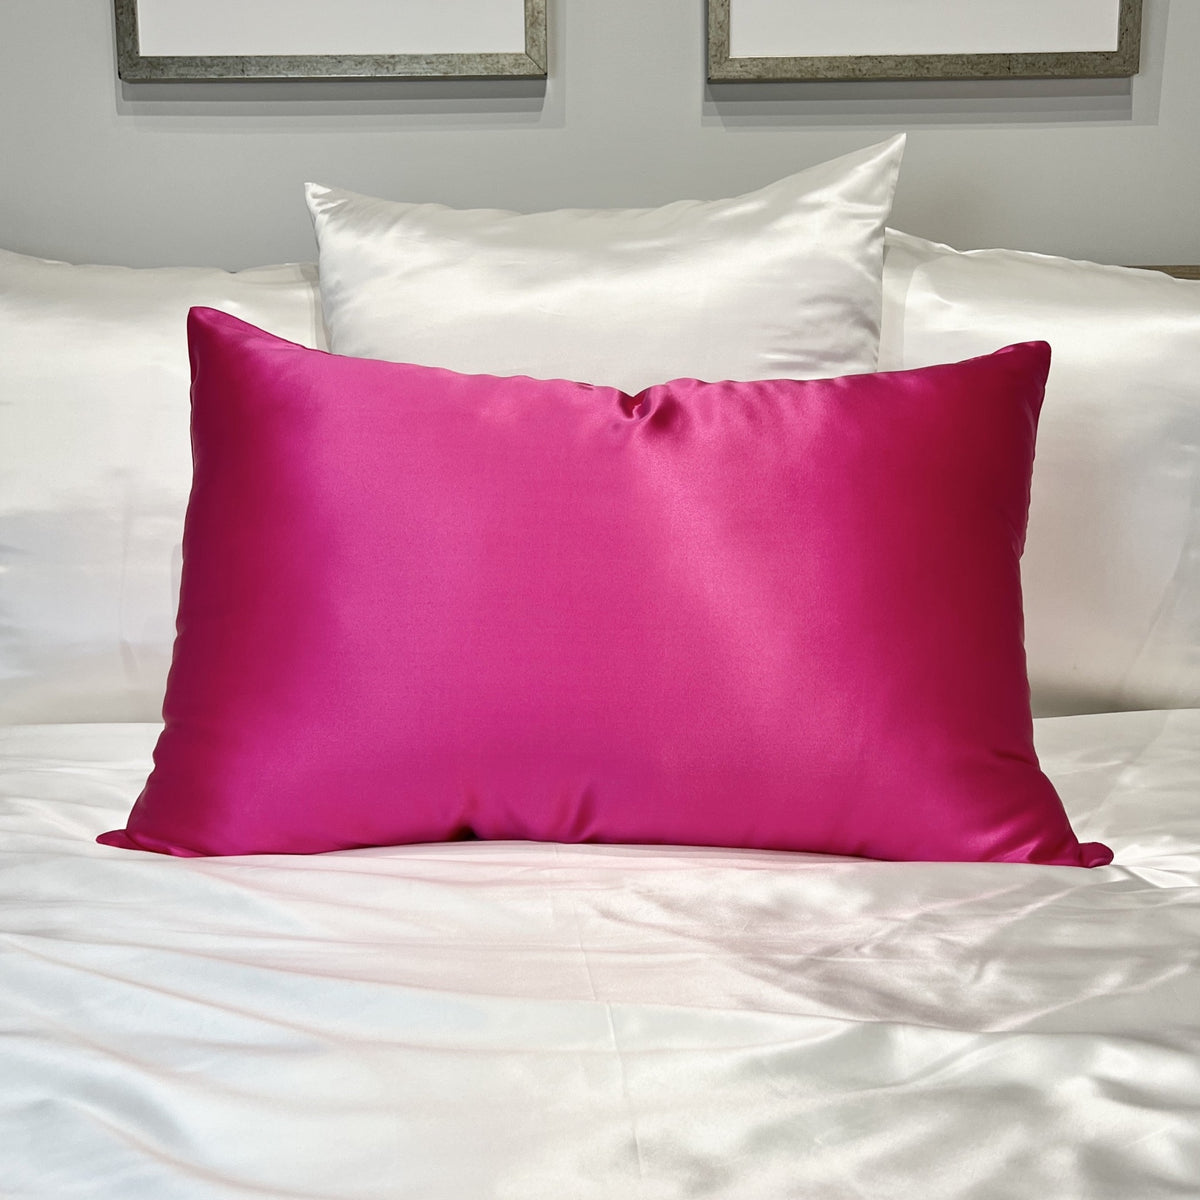 Front View of Mulberry Park Silks Deluxe 19 Momme Pure Silk Pillowcase in Magenta Color